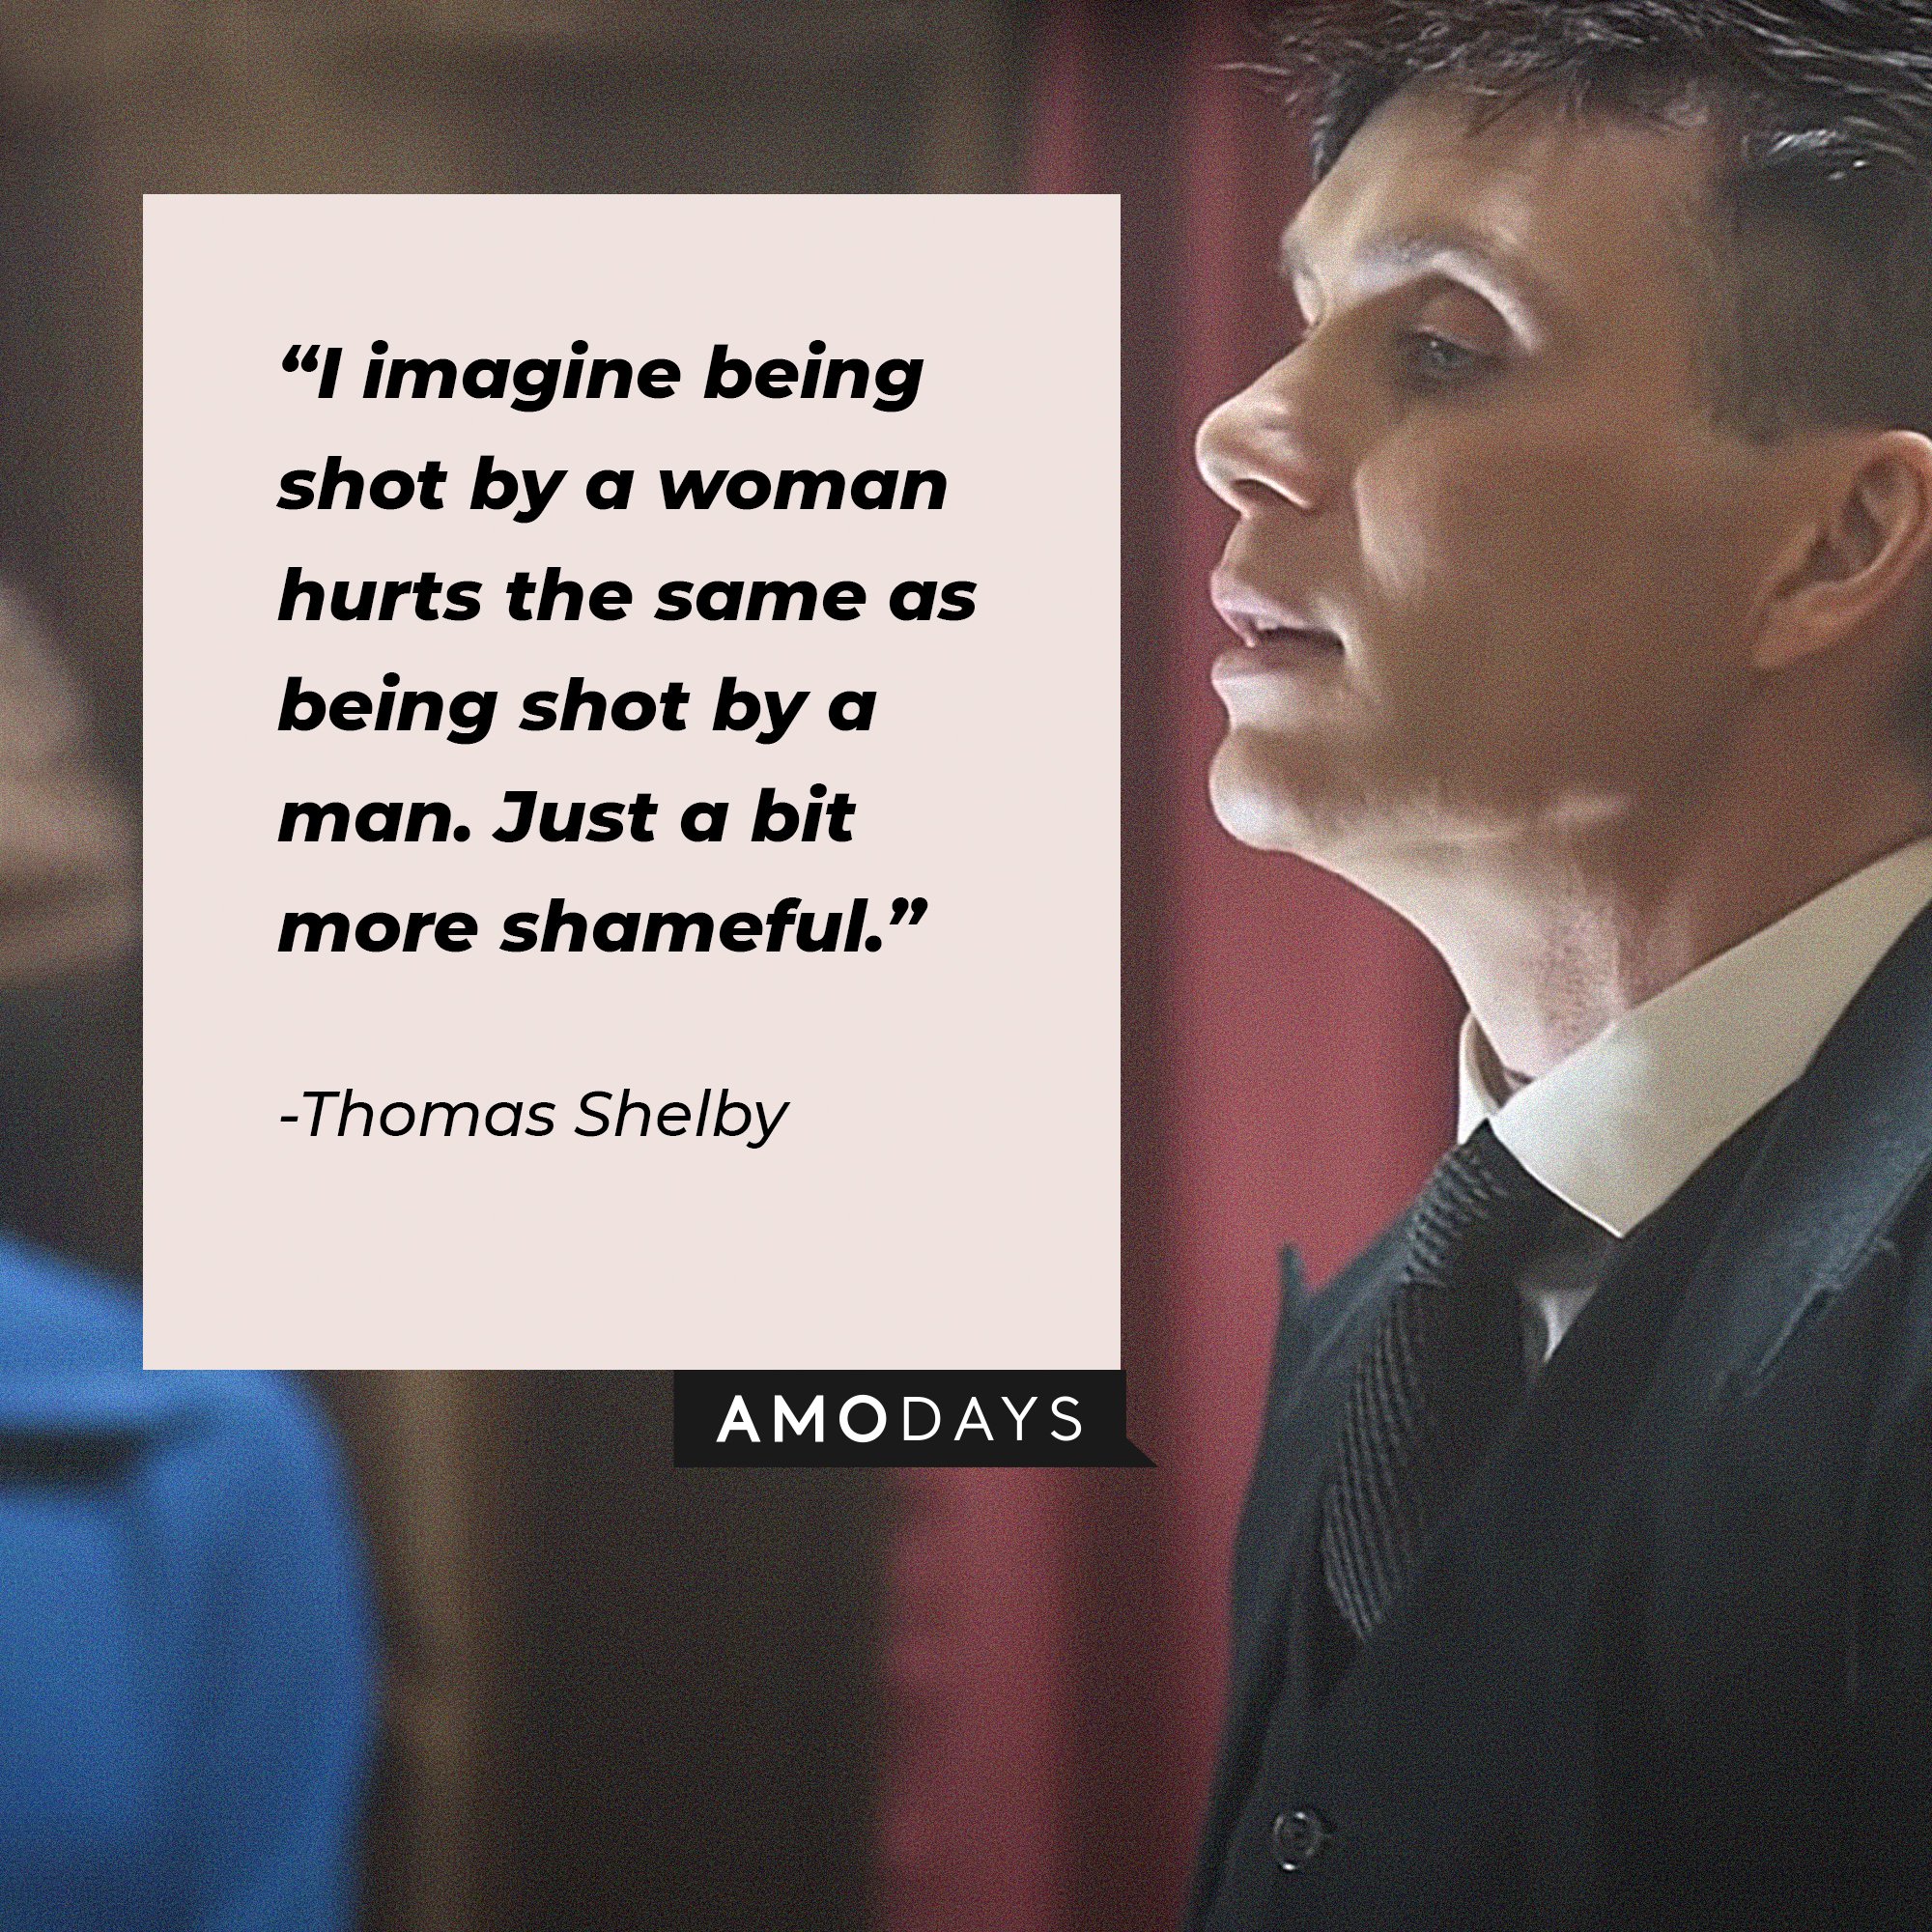 Thomas Shelby's quote: “I imagine being shot by a woman hurts the same as being shot by a man. Just a bit more shameful.”  | Image: AmoDays